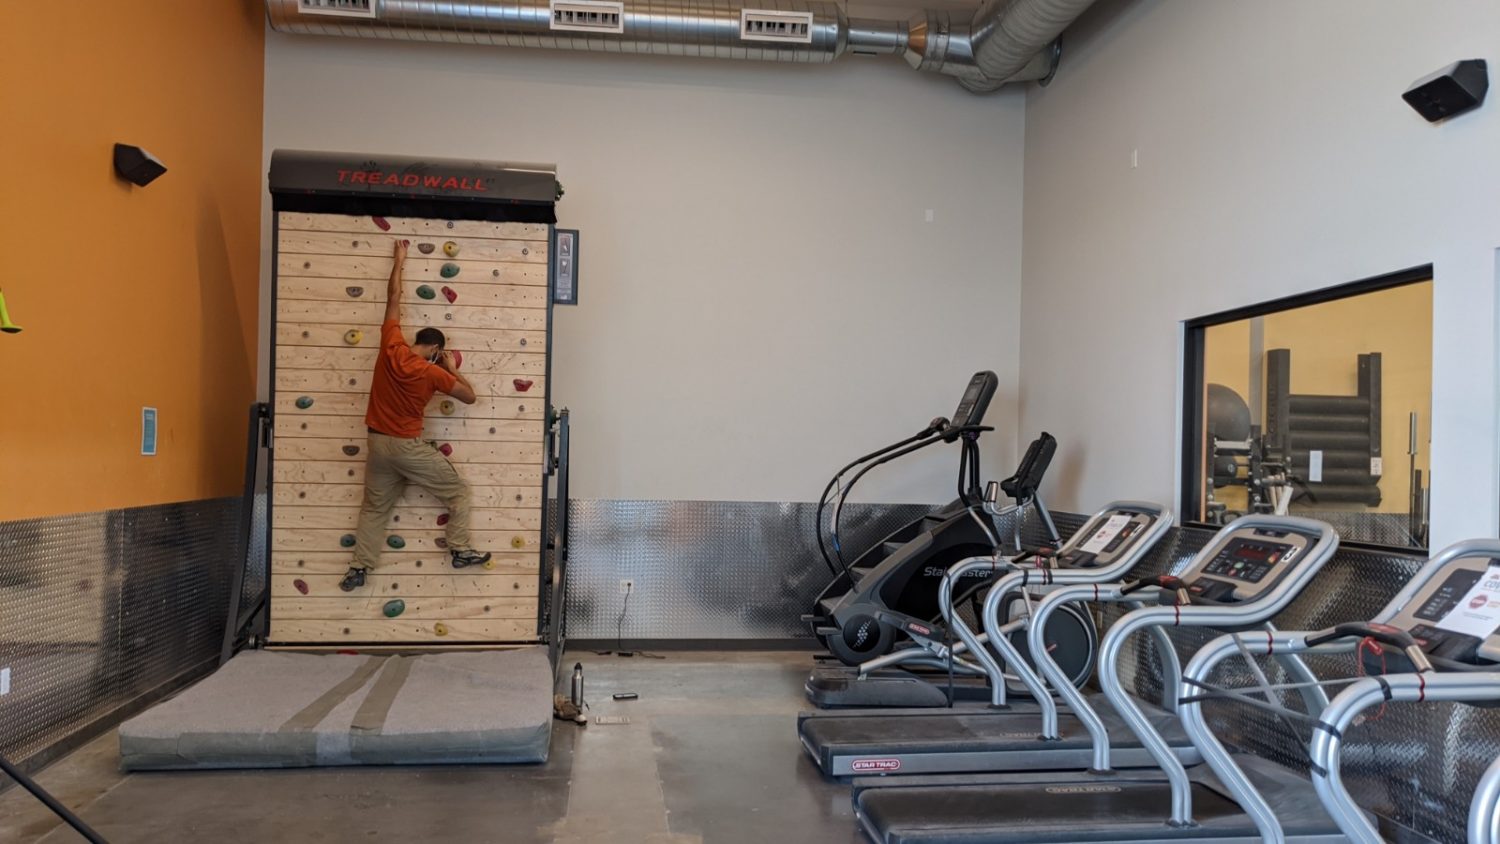 Treadwall by Brewer Fitness, Treadwall, Rotating climbing walls, Training for climbing, Vertical fitness